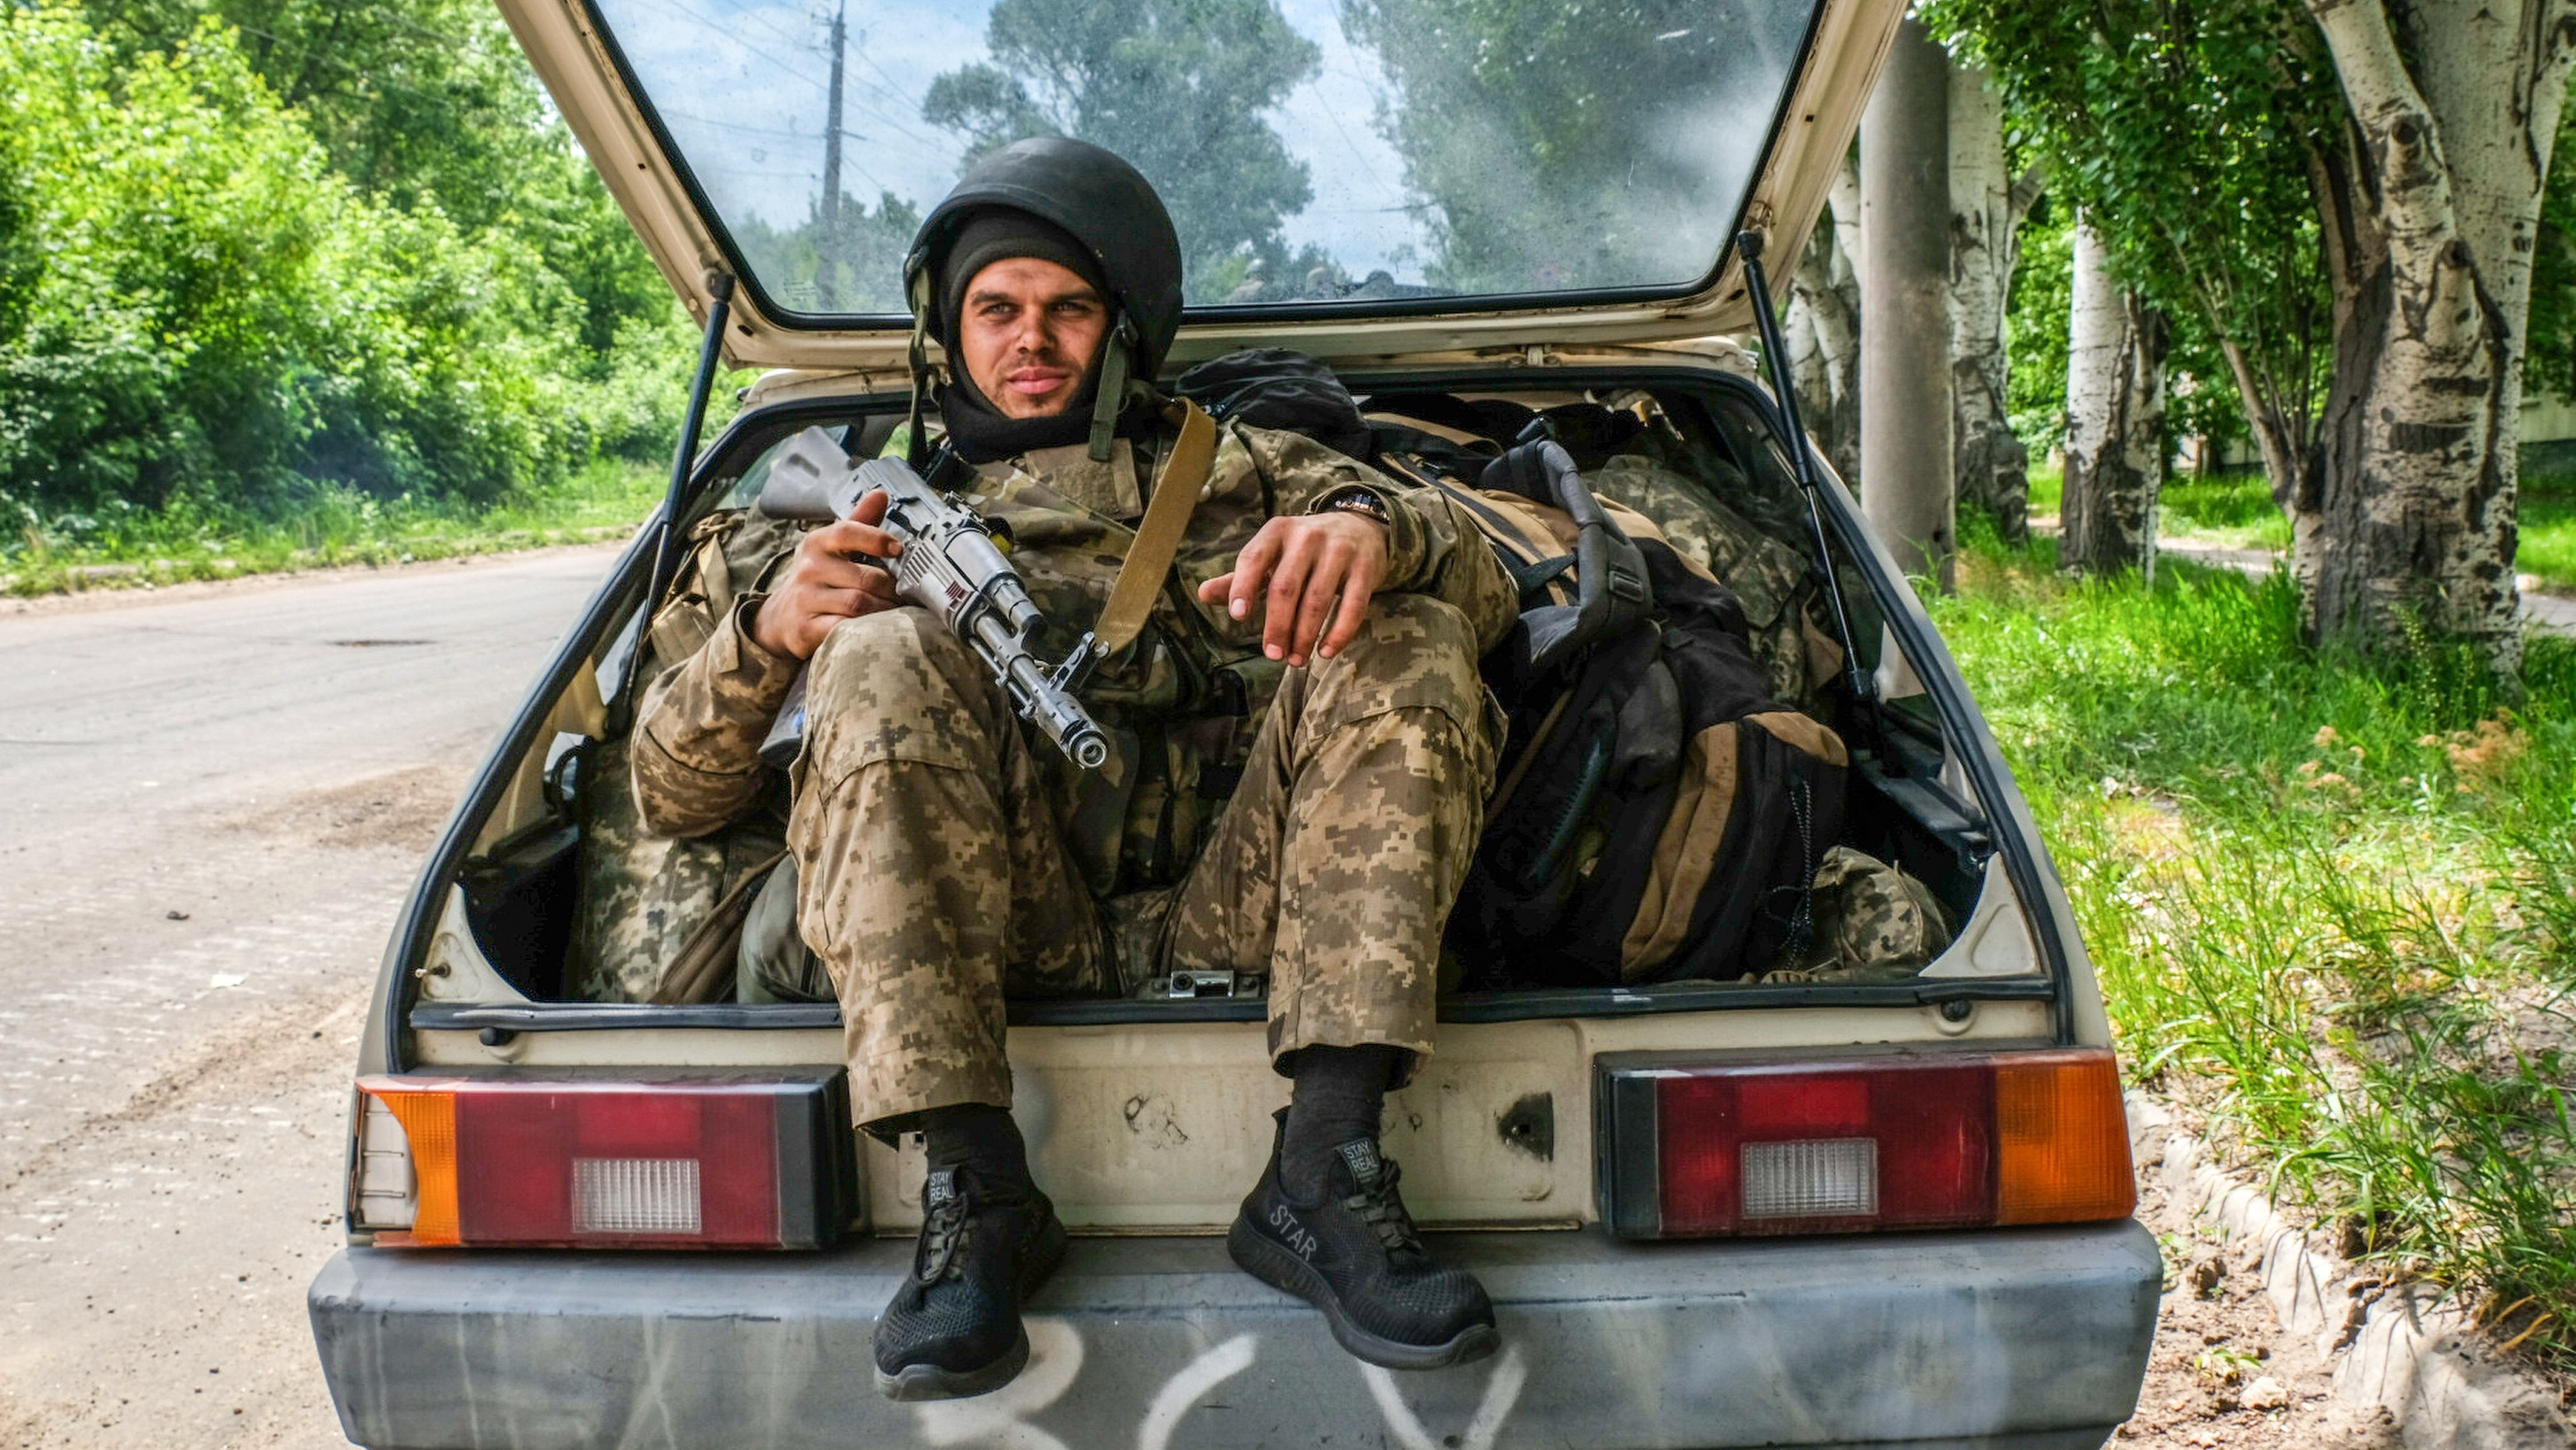 A soldier seen sitting in a car trunk full of backpacks